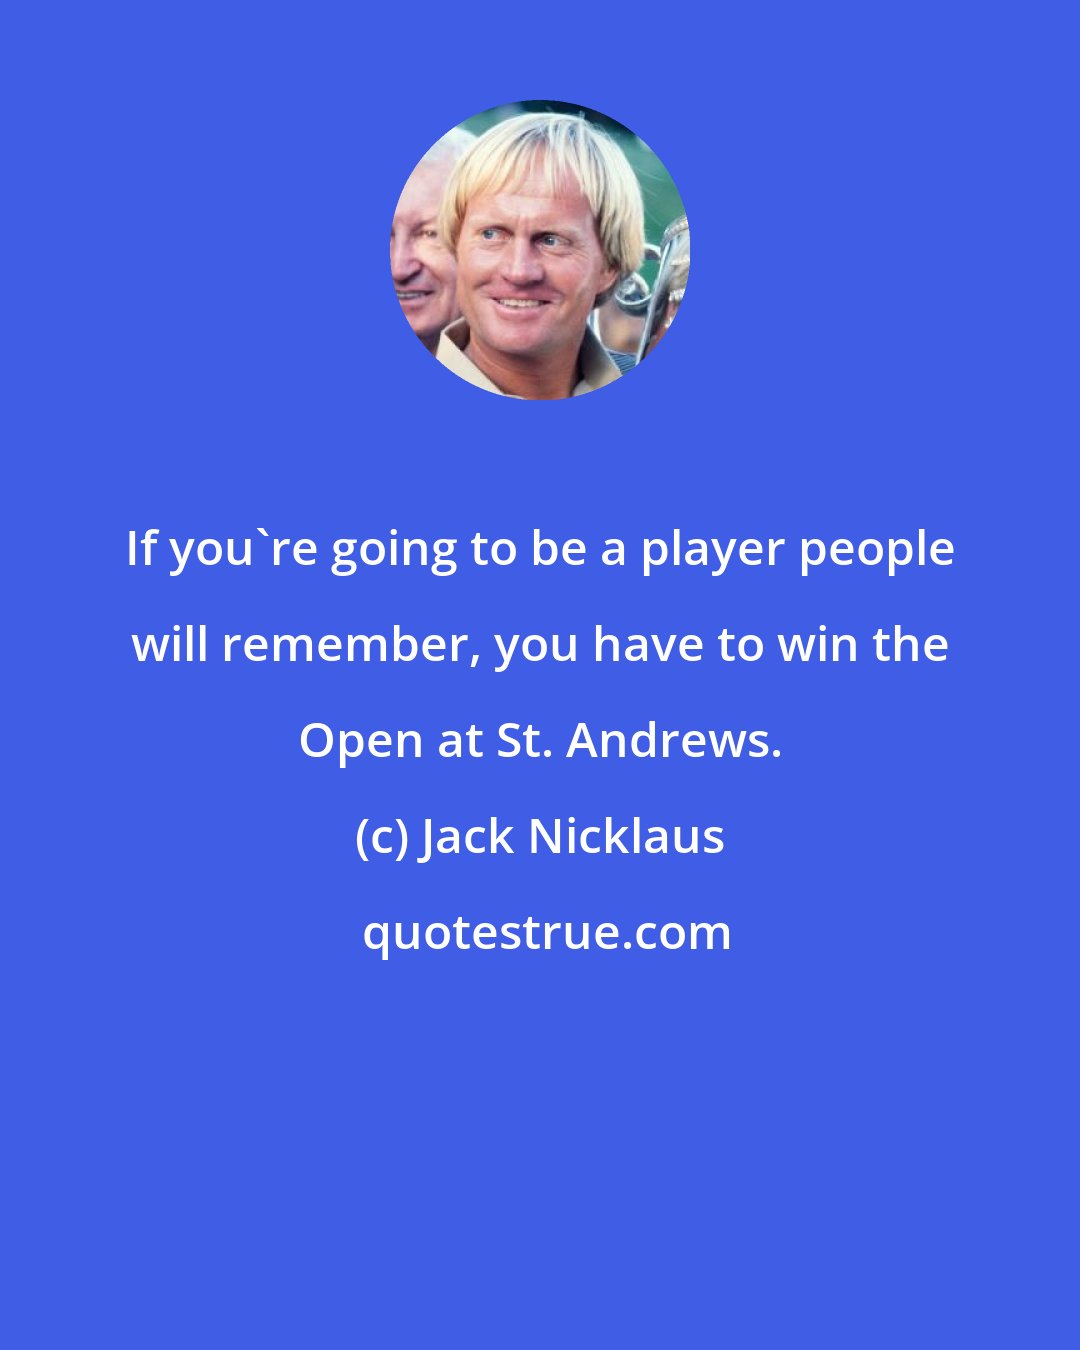 Jack Nicklaus: If you're going to be a player people will remember, you have to win the Open at St. Andrews.